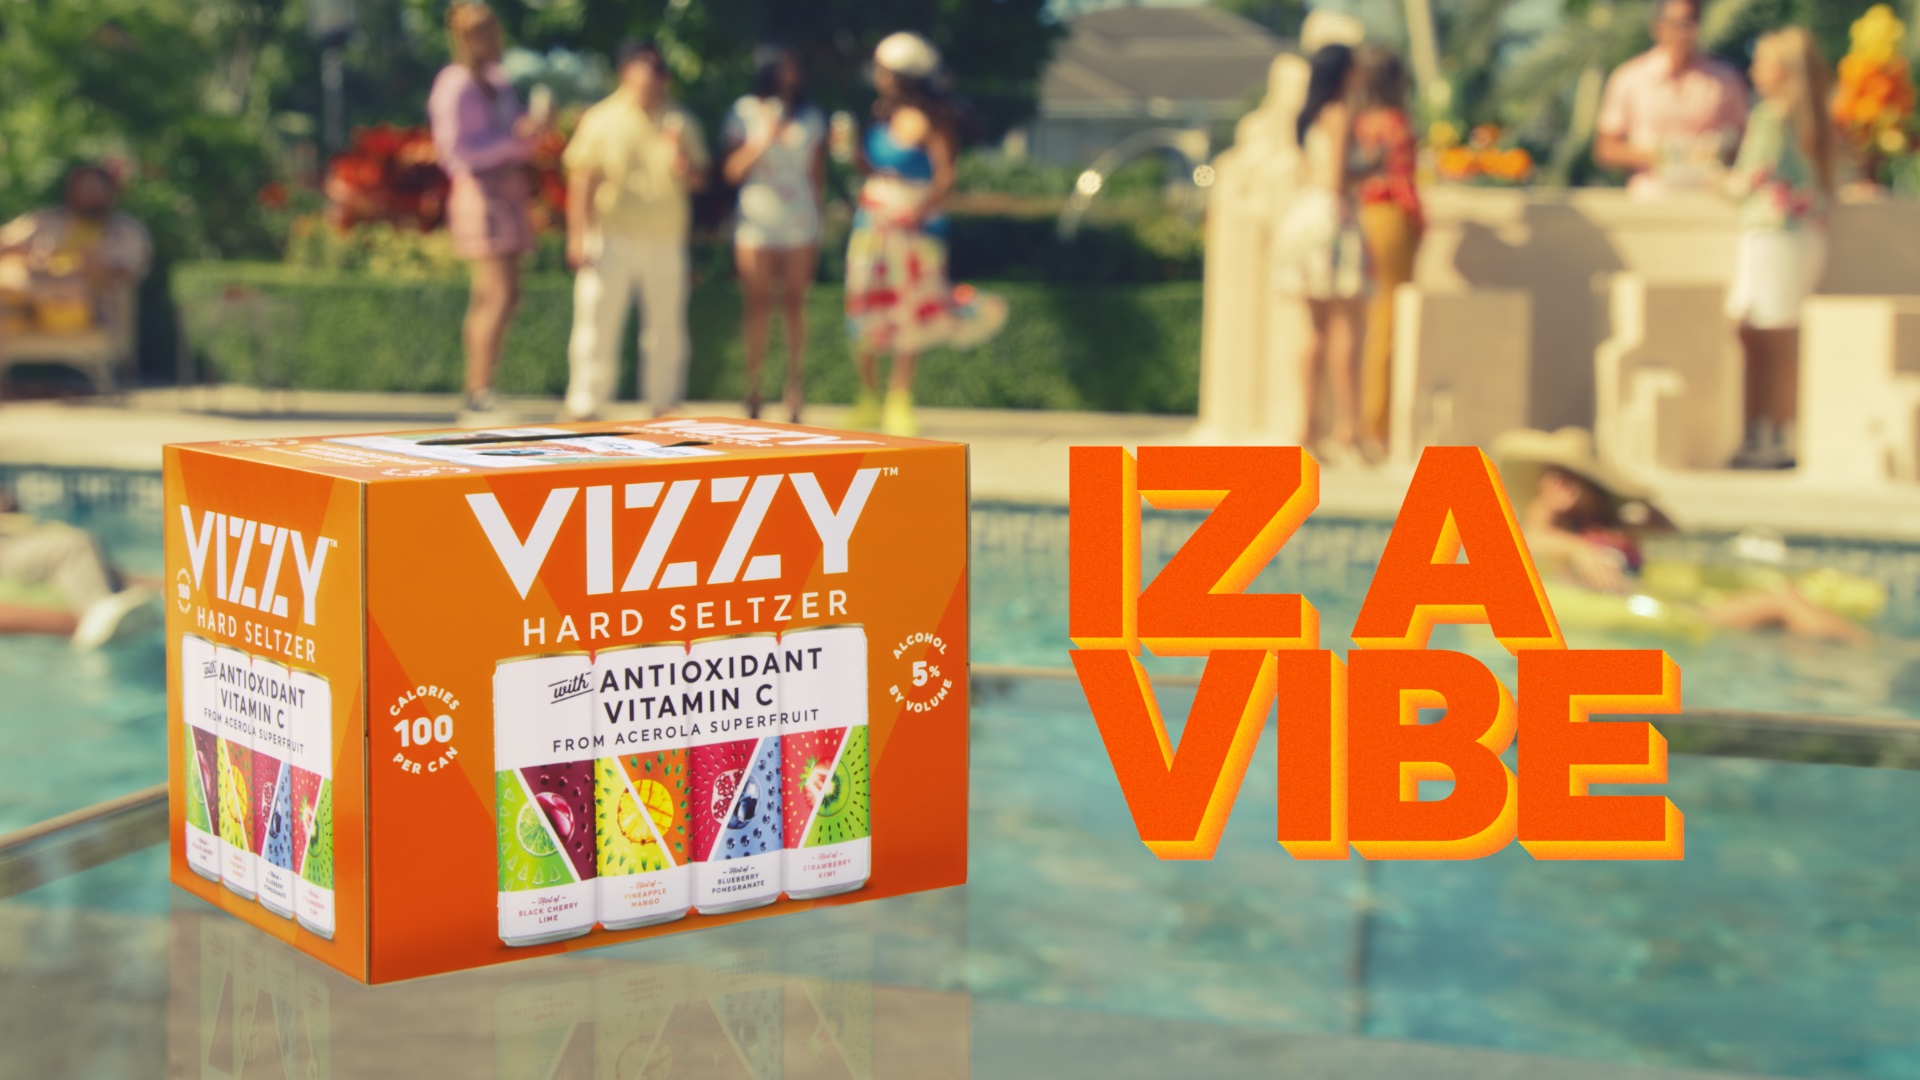 Vizzy, one of the fastest-growing hard seltzer brands in the U.S., drawing  new consumers into seltzer segment